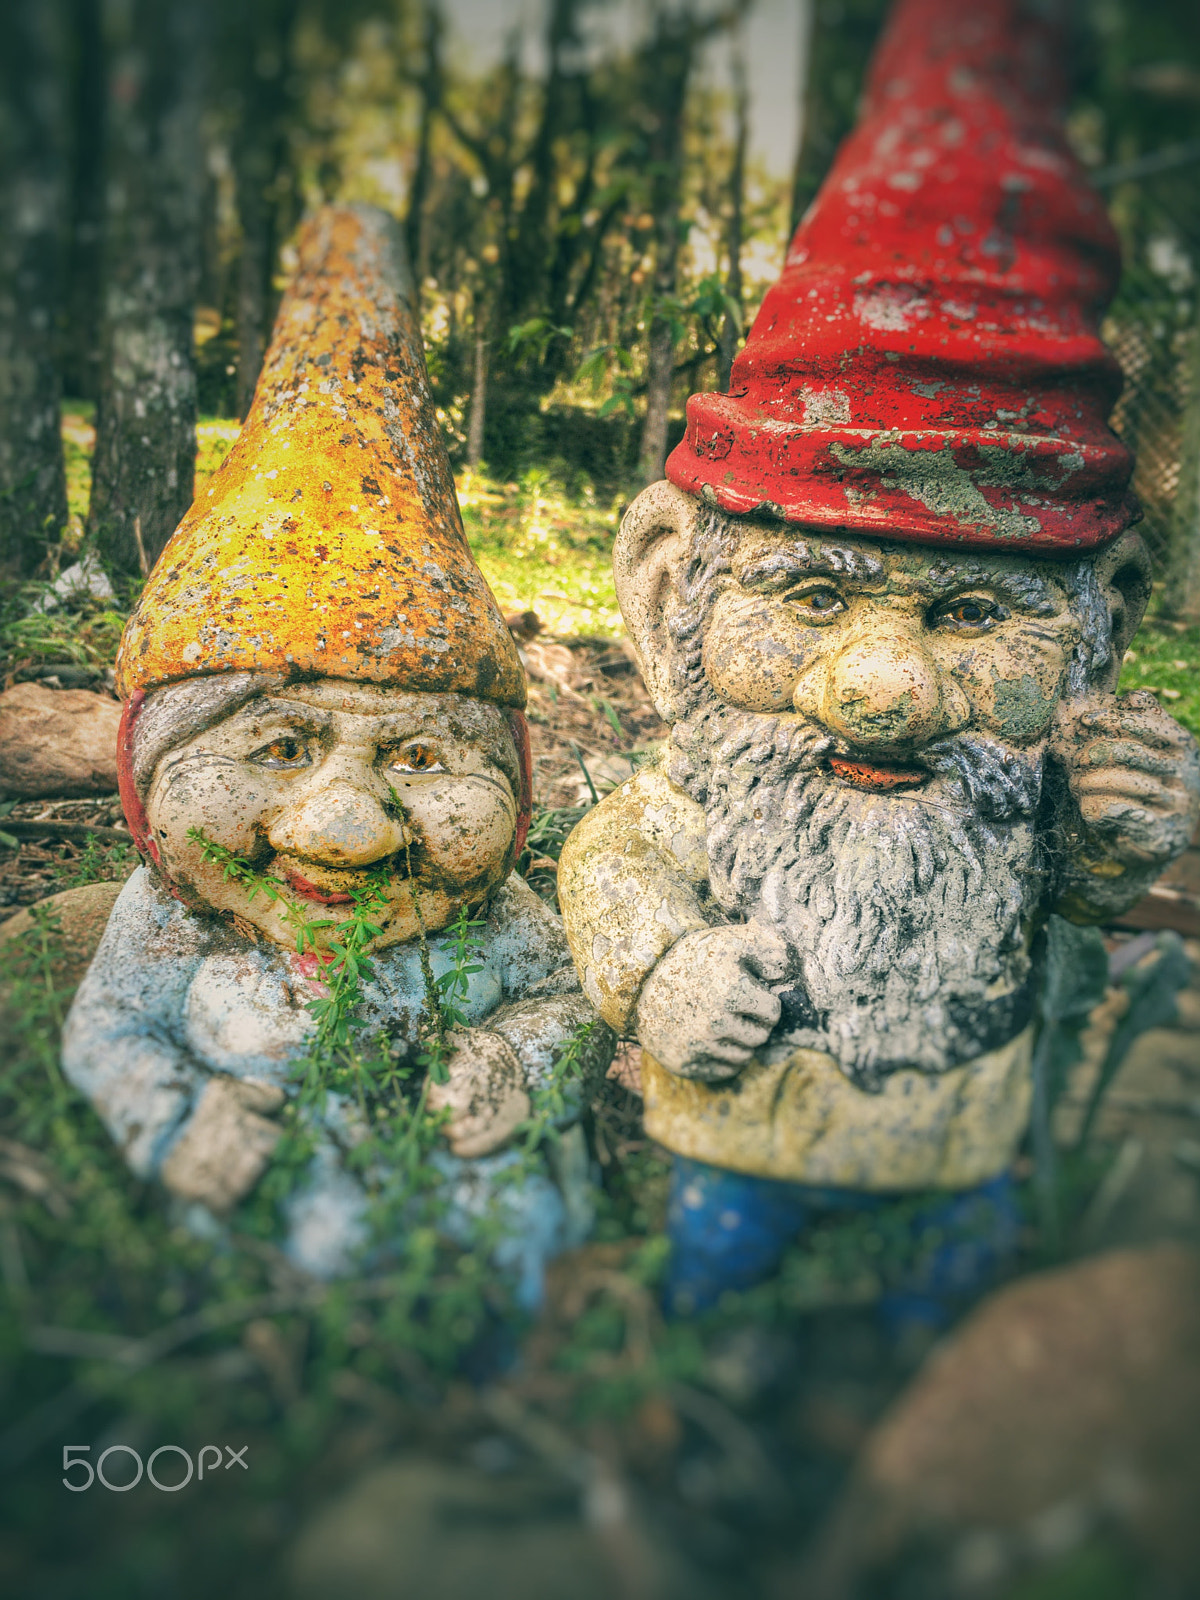 Moment SuperFish 15mm sample photo. Old garden gnome photography